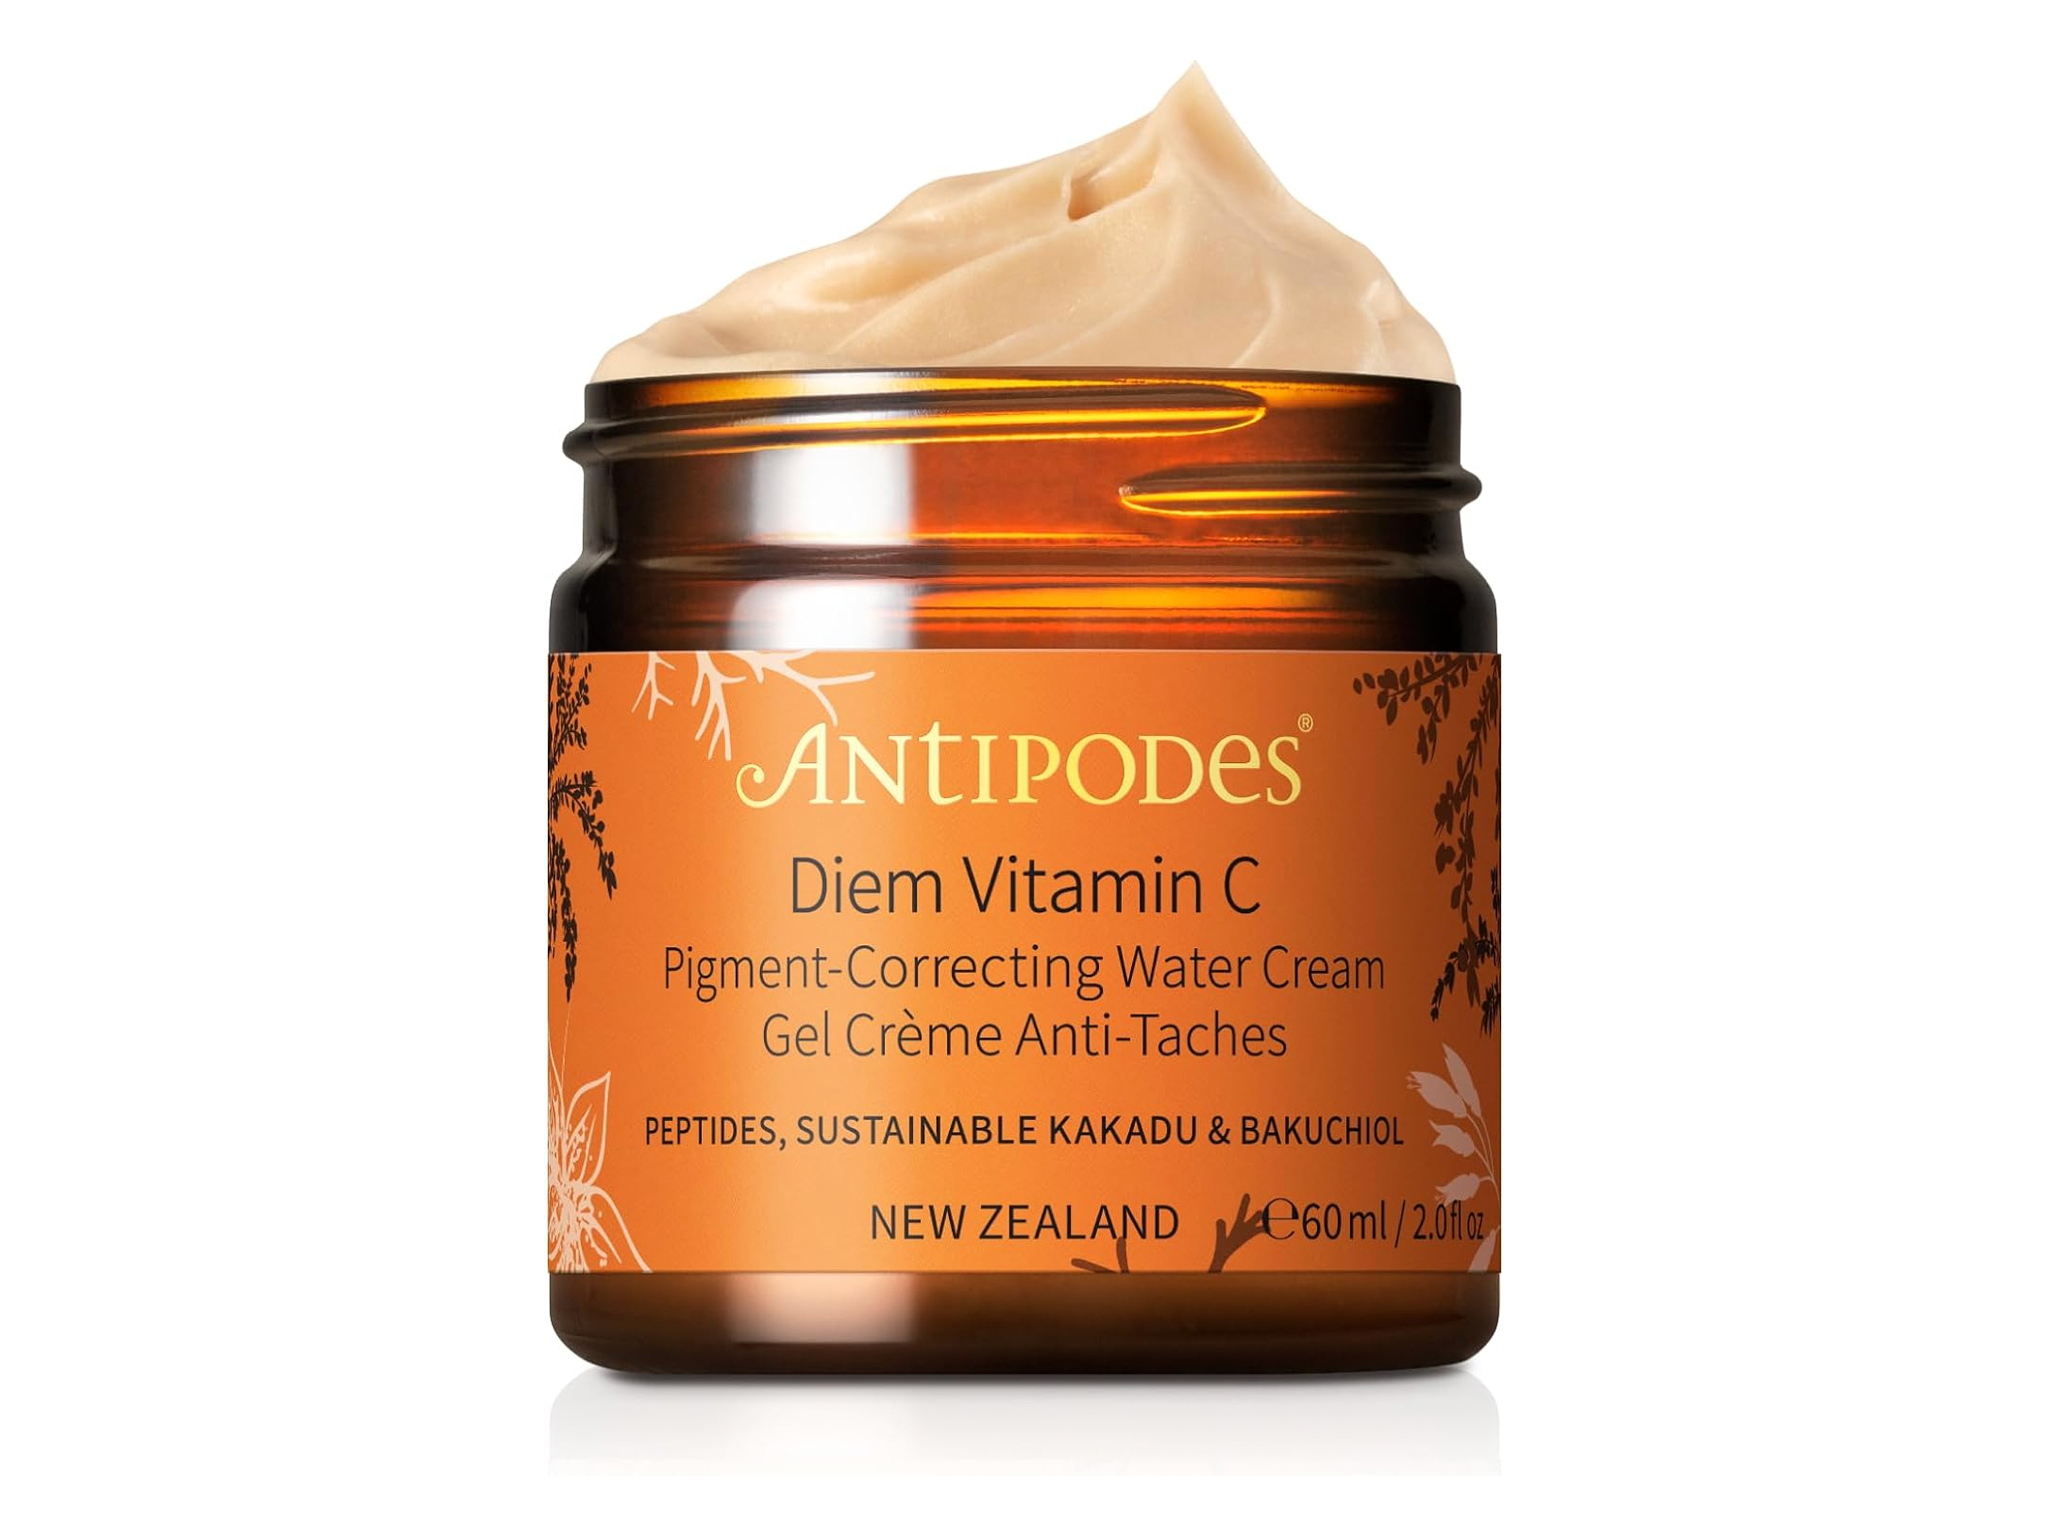 Antipodes-best-skincare-products-for-hyperpigmentation-indybest